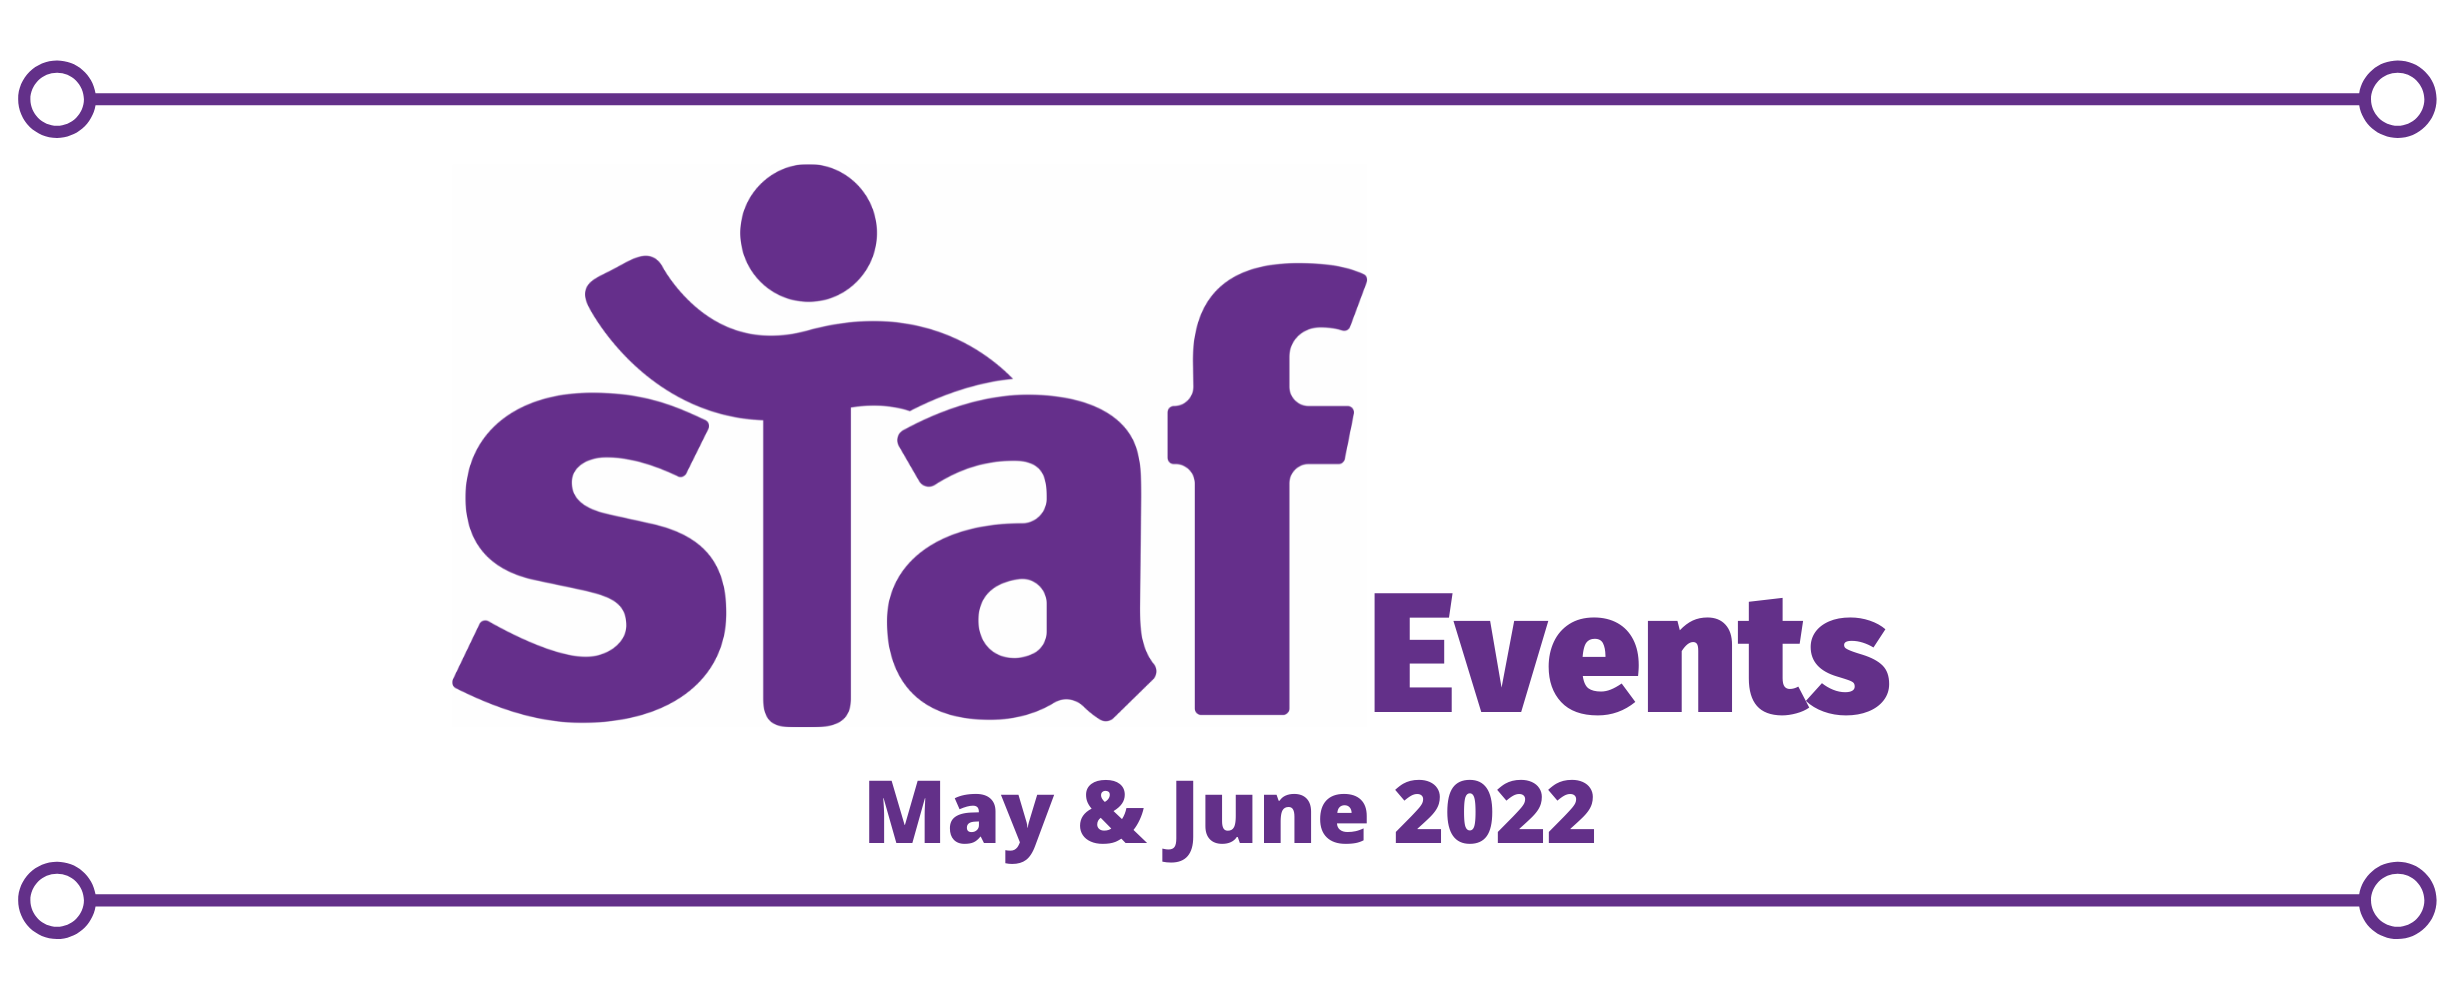 Staf Events May & June 